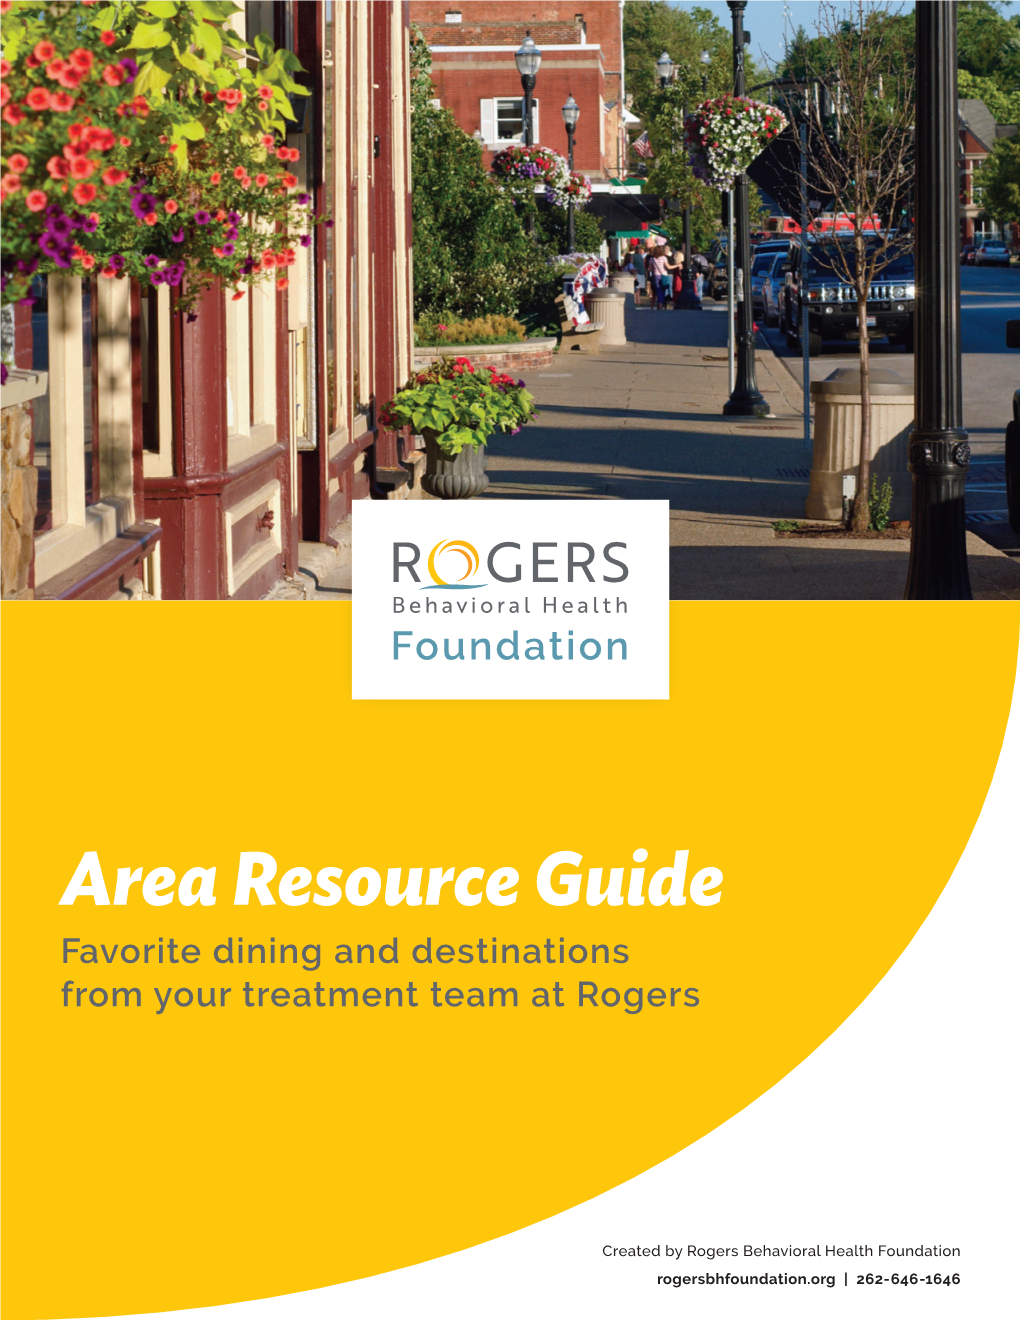 Area Resource Guide Favorite Dining and Destinations from Your Treatment Team at Rogers